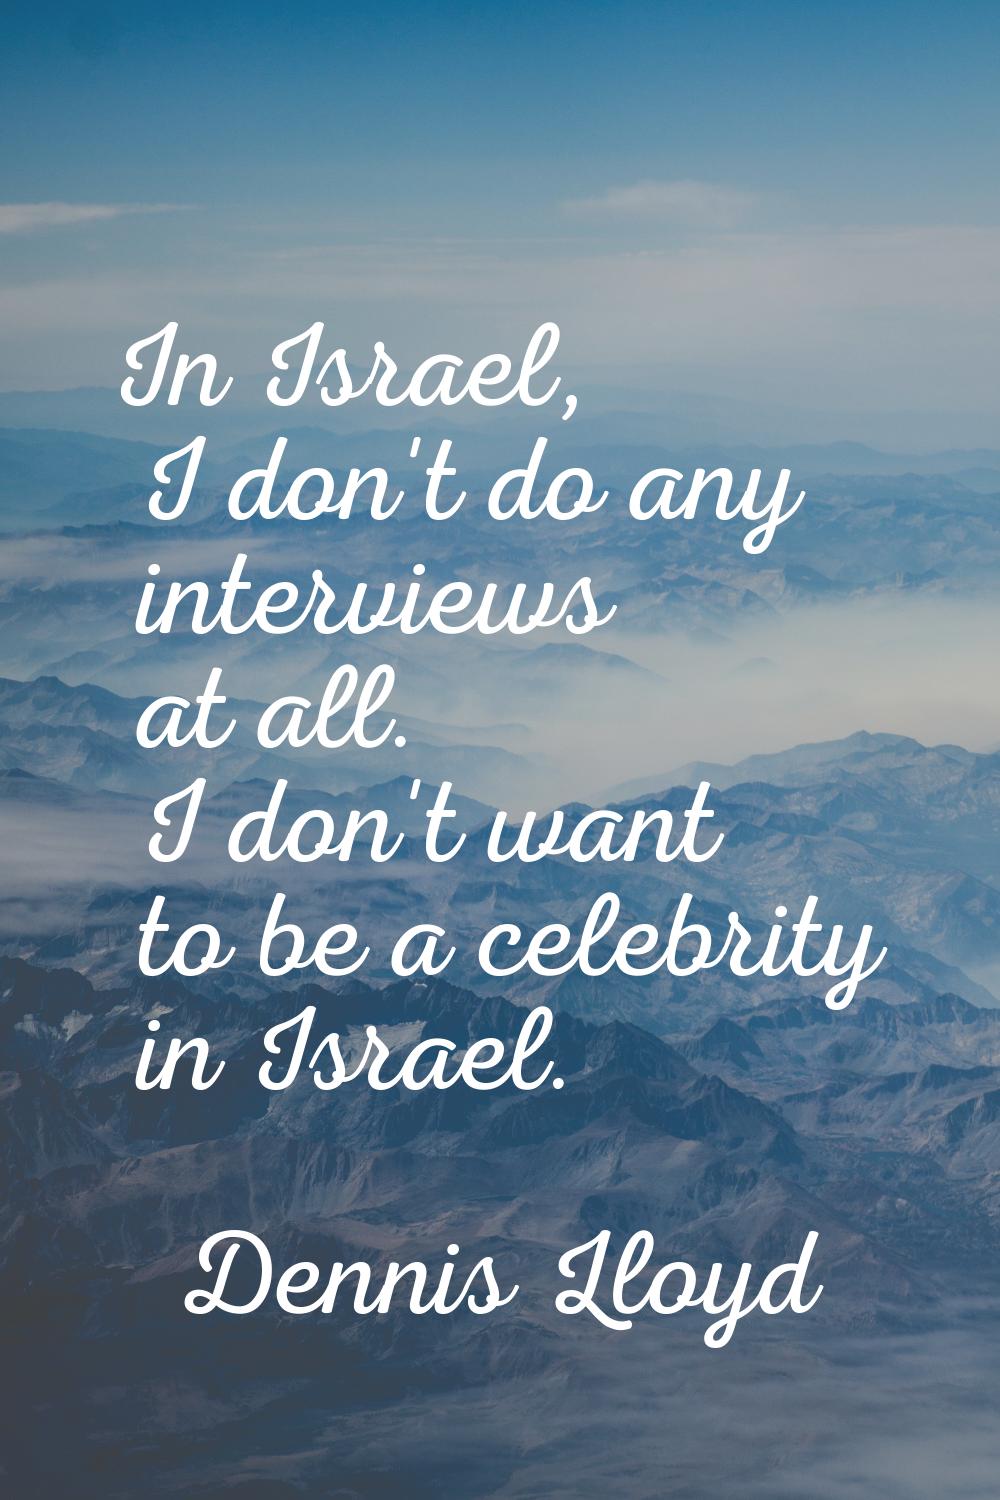 In Israel, I don't do any interviews at all. I don't want to be a celebrity in Israel.